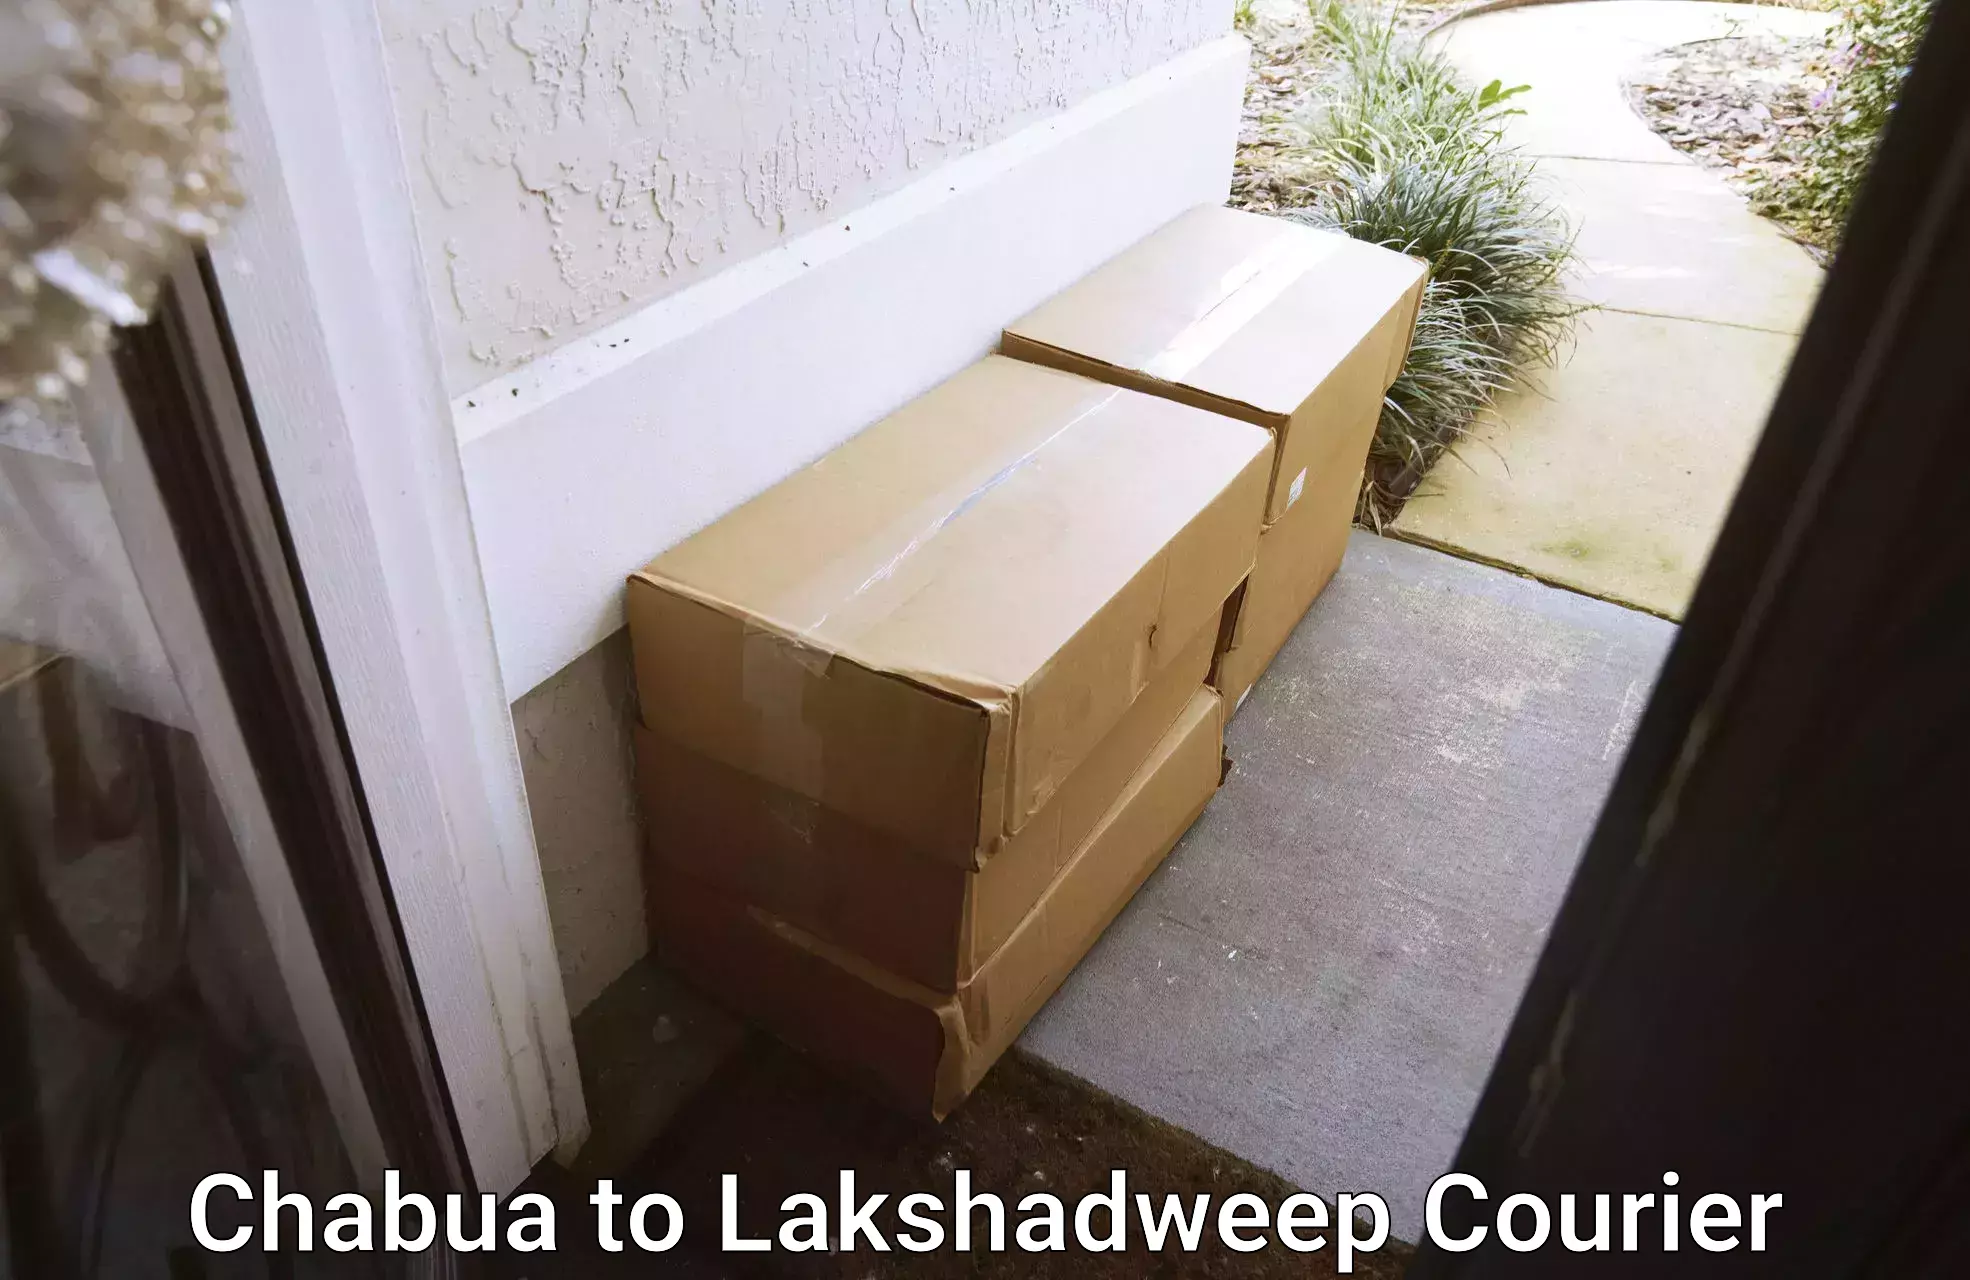 Courier tracking online Chabua to Lakshadweep